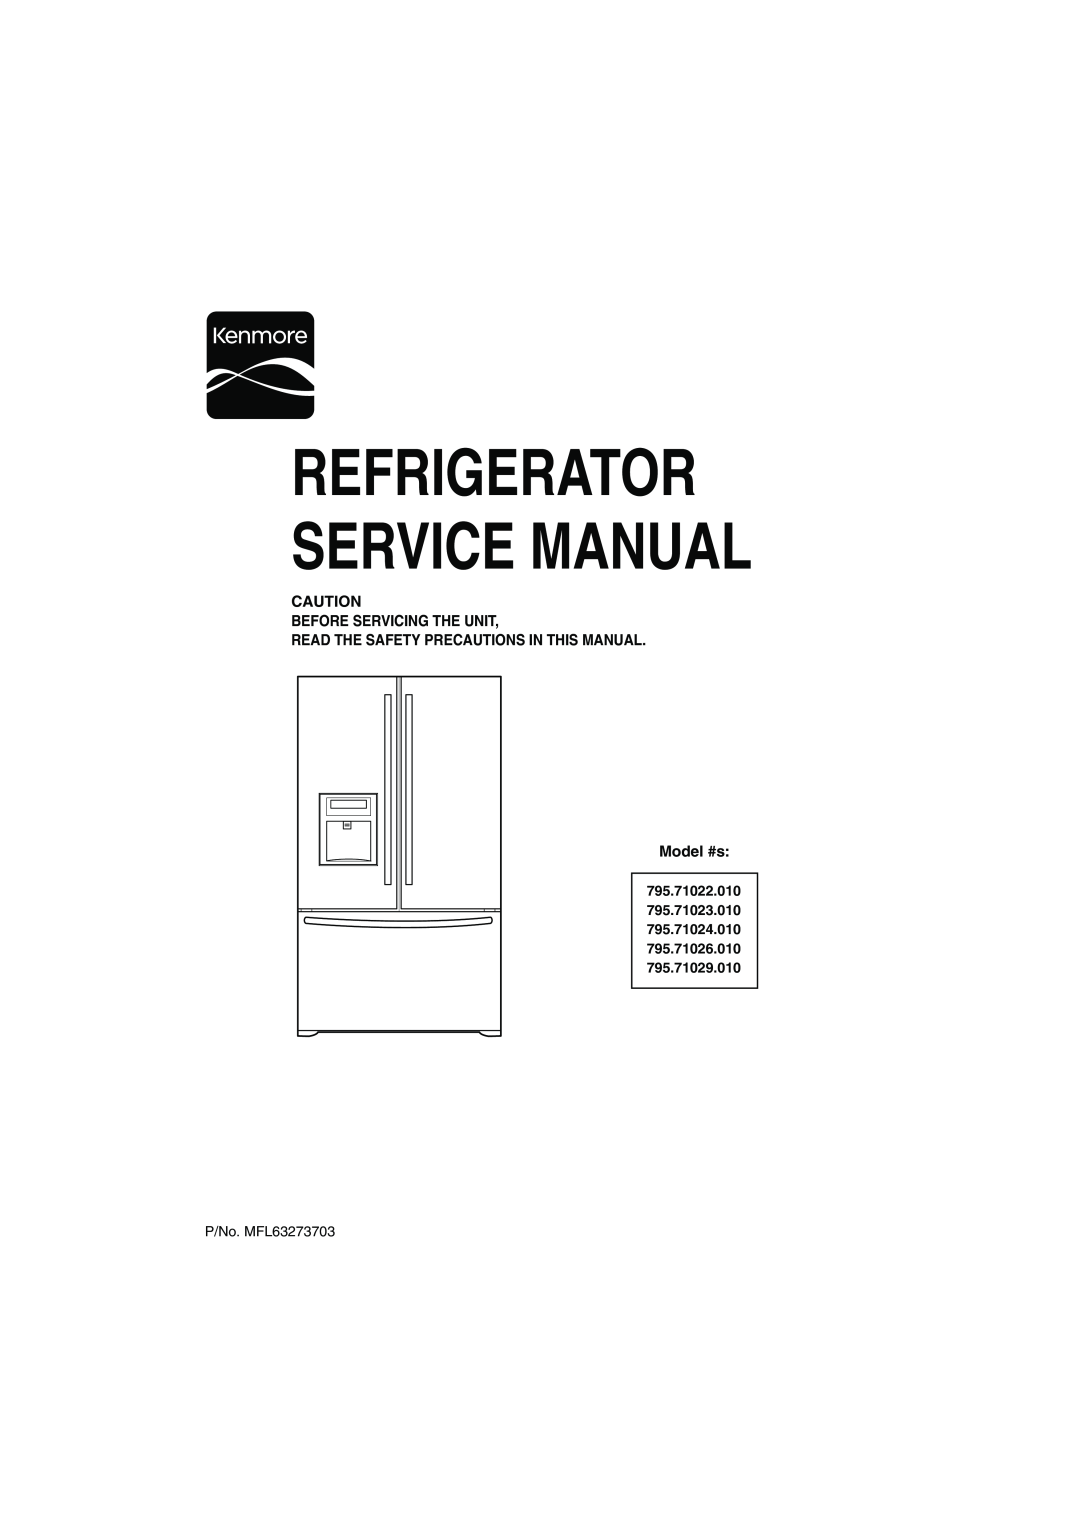 Kenmore 795-71022.010 service manual Before Servicing The Unit Read The Safety Precautions In This Manual, Model #s 